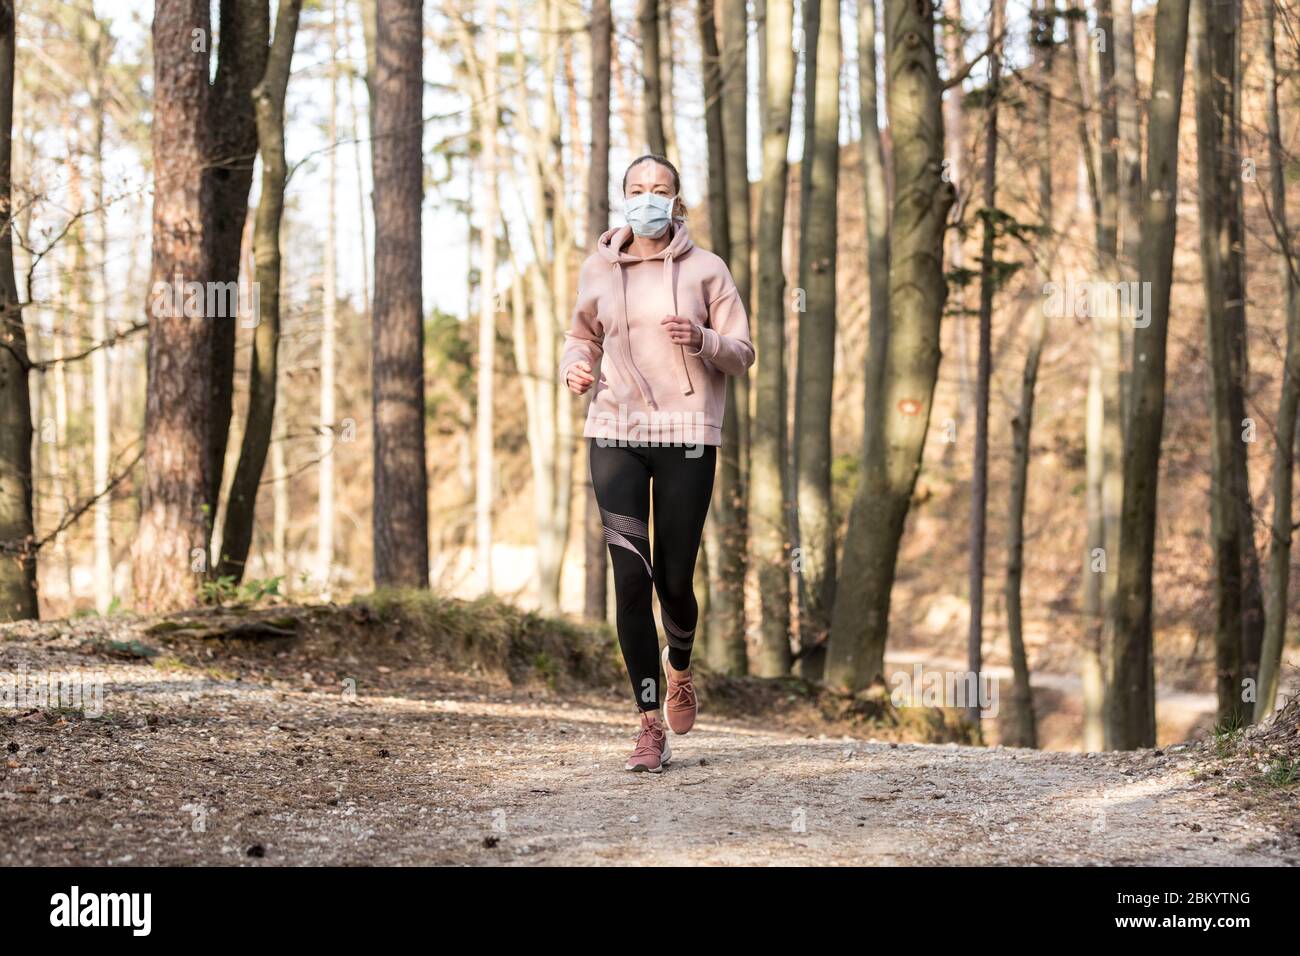 Corona virus, or Covid-19, is spreading all over the world. Portrait of caucasian sporty woman wearing a medical protection face mask while running in Stock Photo